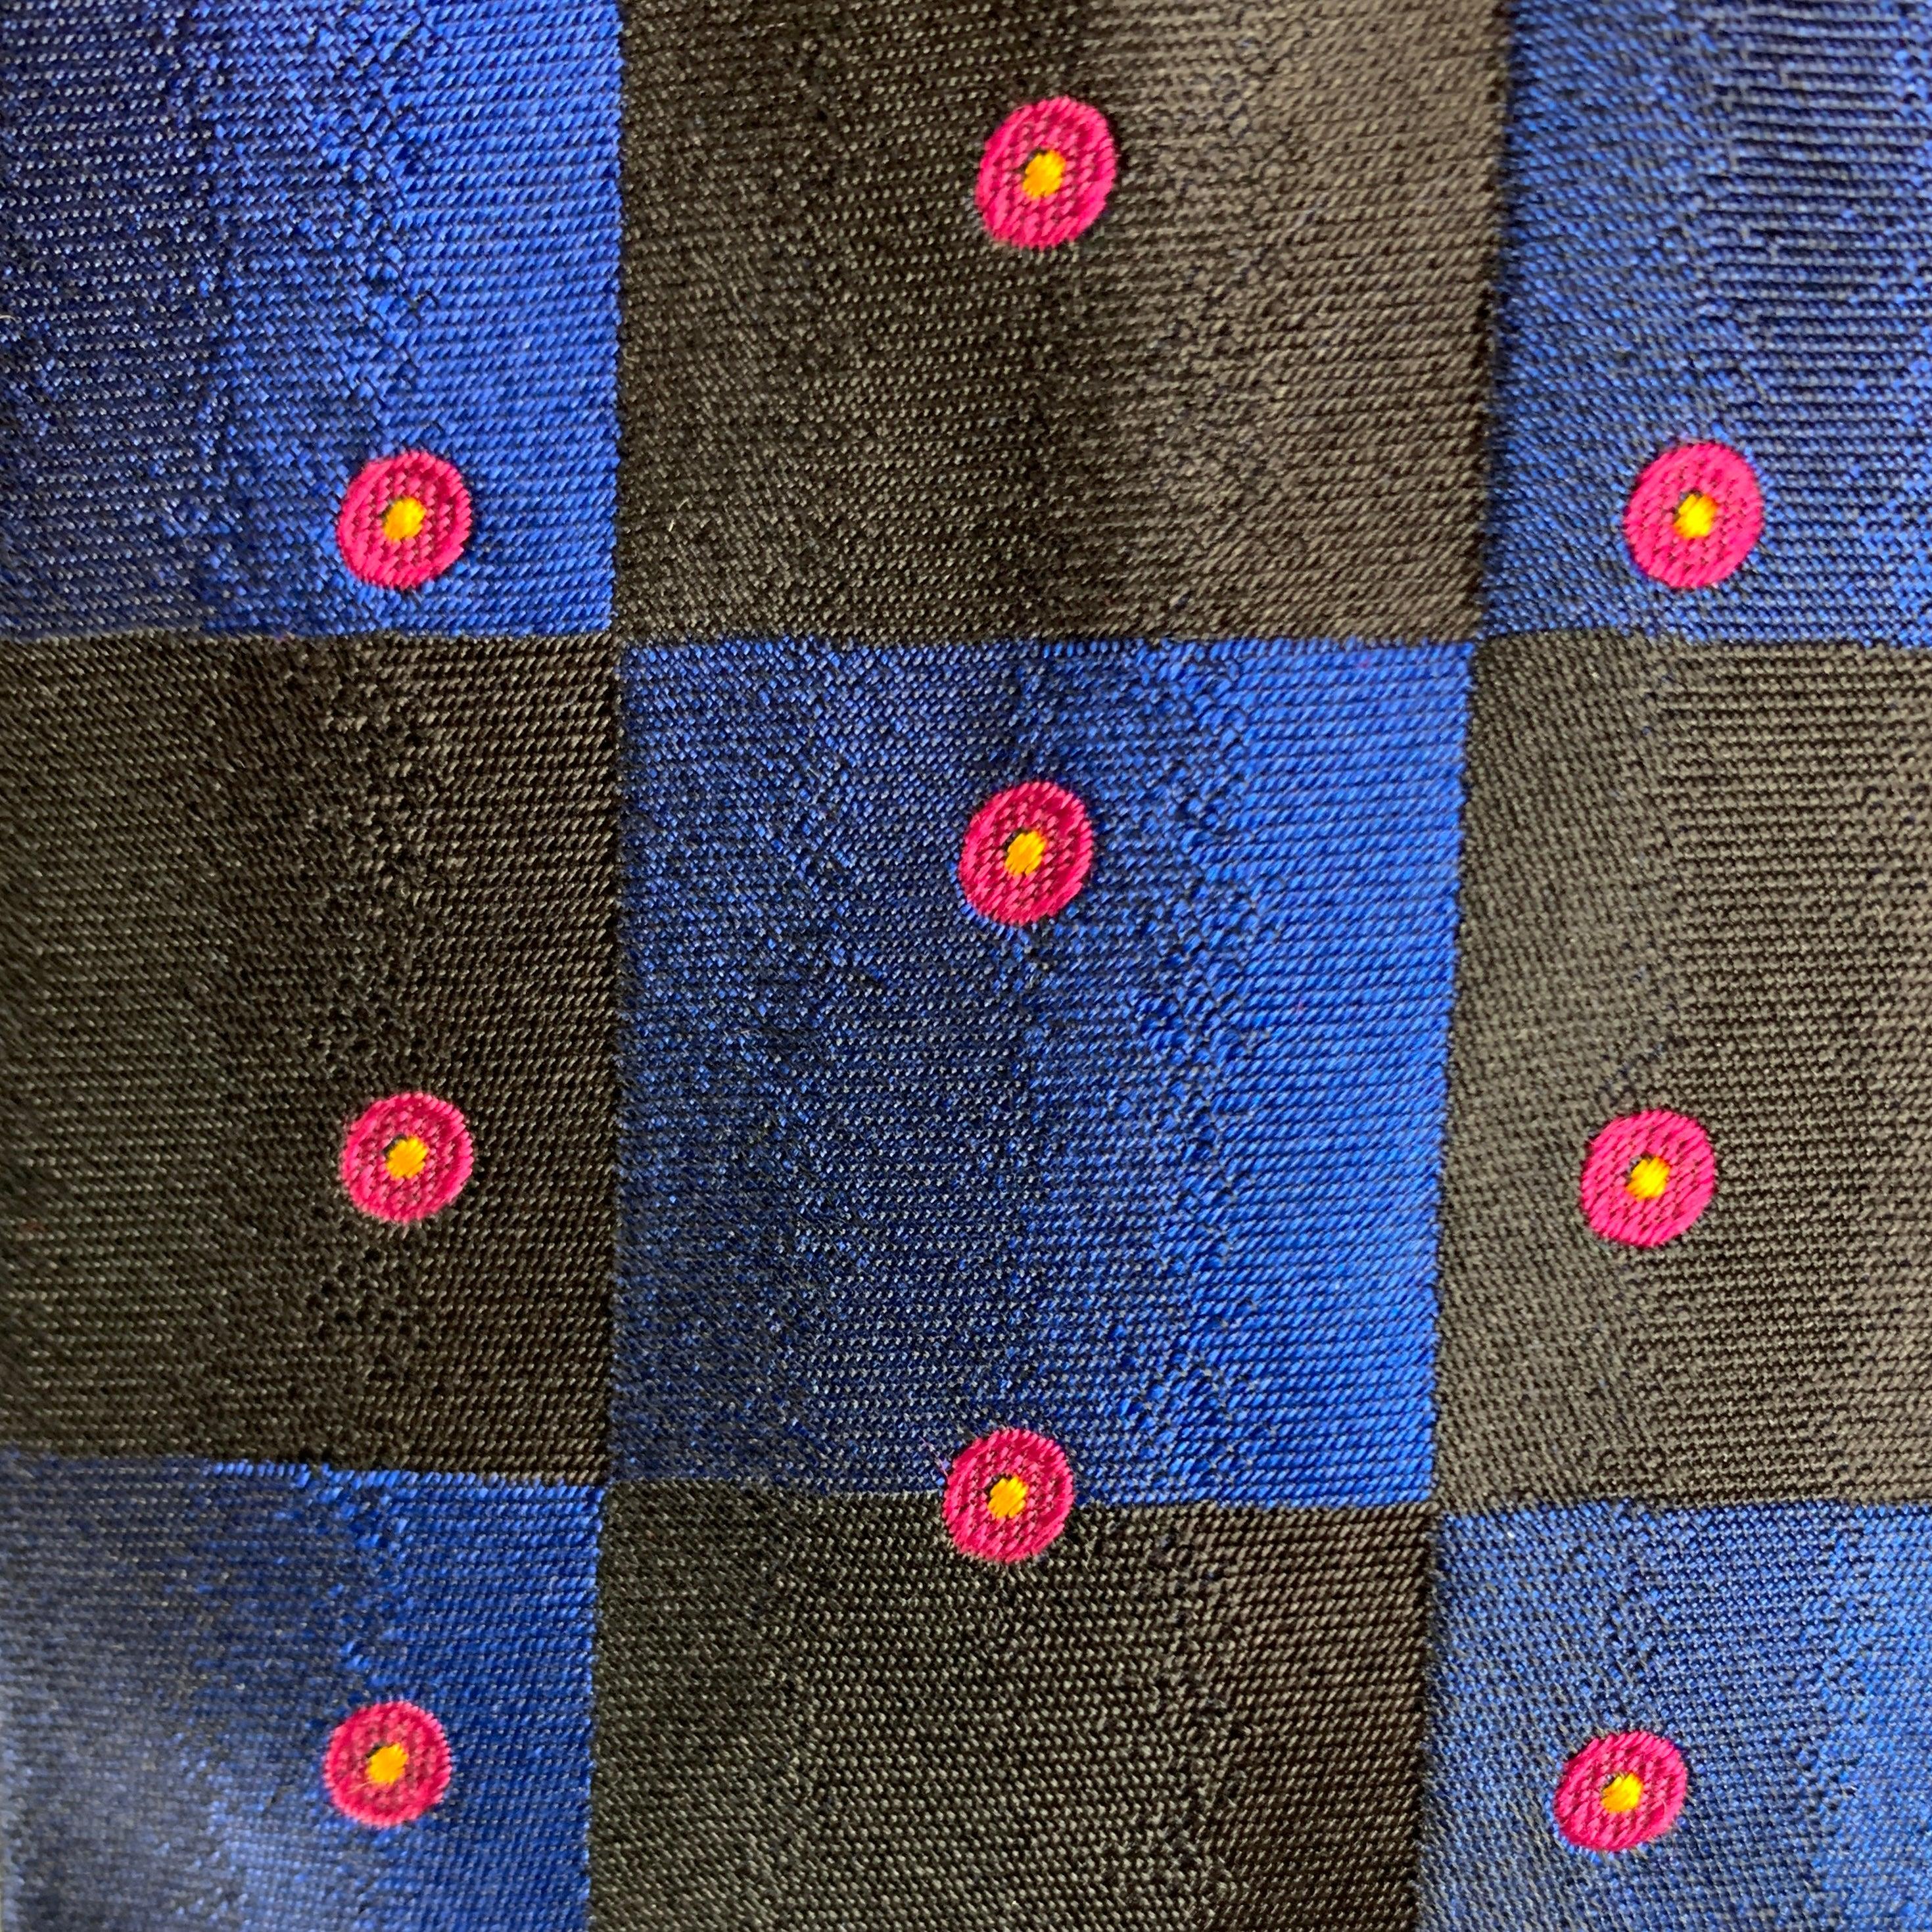 CHRISTIAN LACROIX classic necktie comes in a black and navy checkered print, featuring pink dots. 100% silk. Made in Italy.
Very Good Pre-Owned Condition.
 

Measurements: 
  Width: 3.5 inches Length: 58 inches 




  
  
 
Reference: